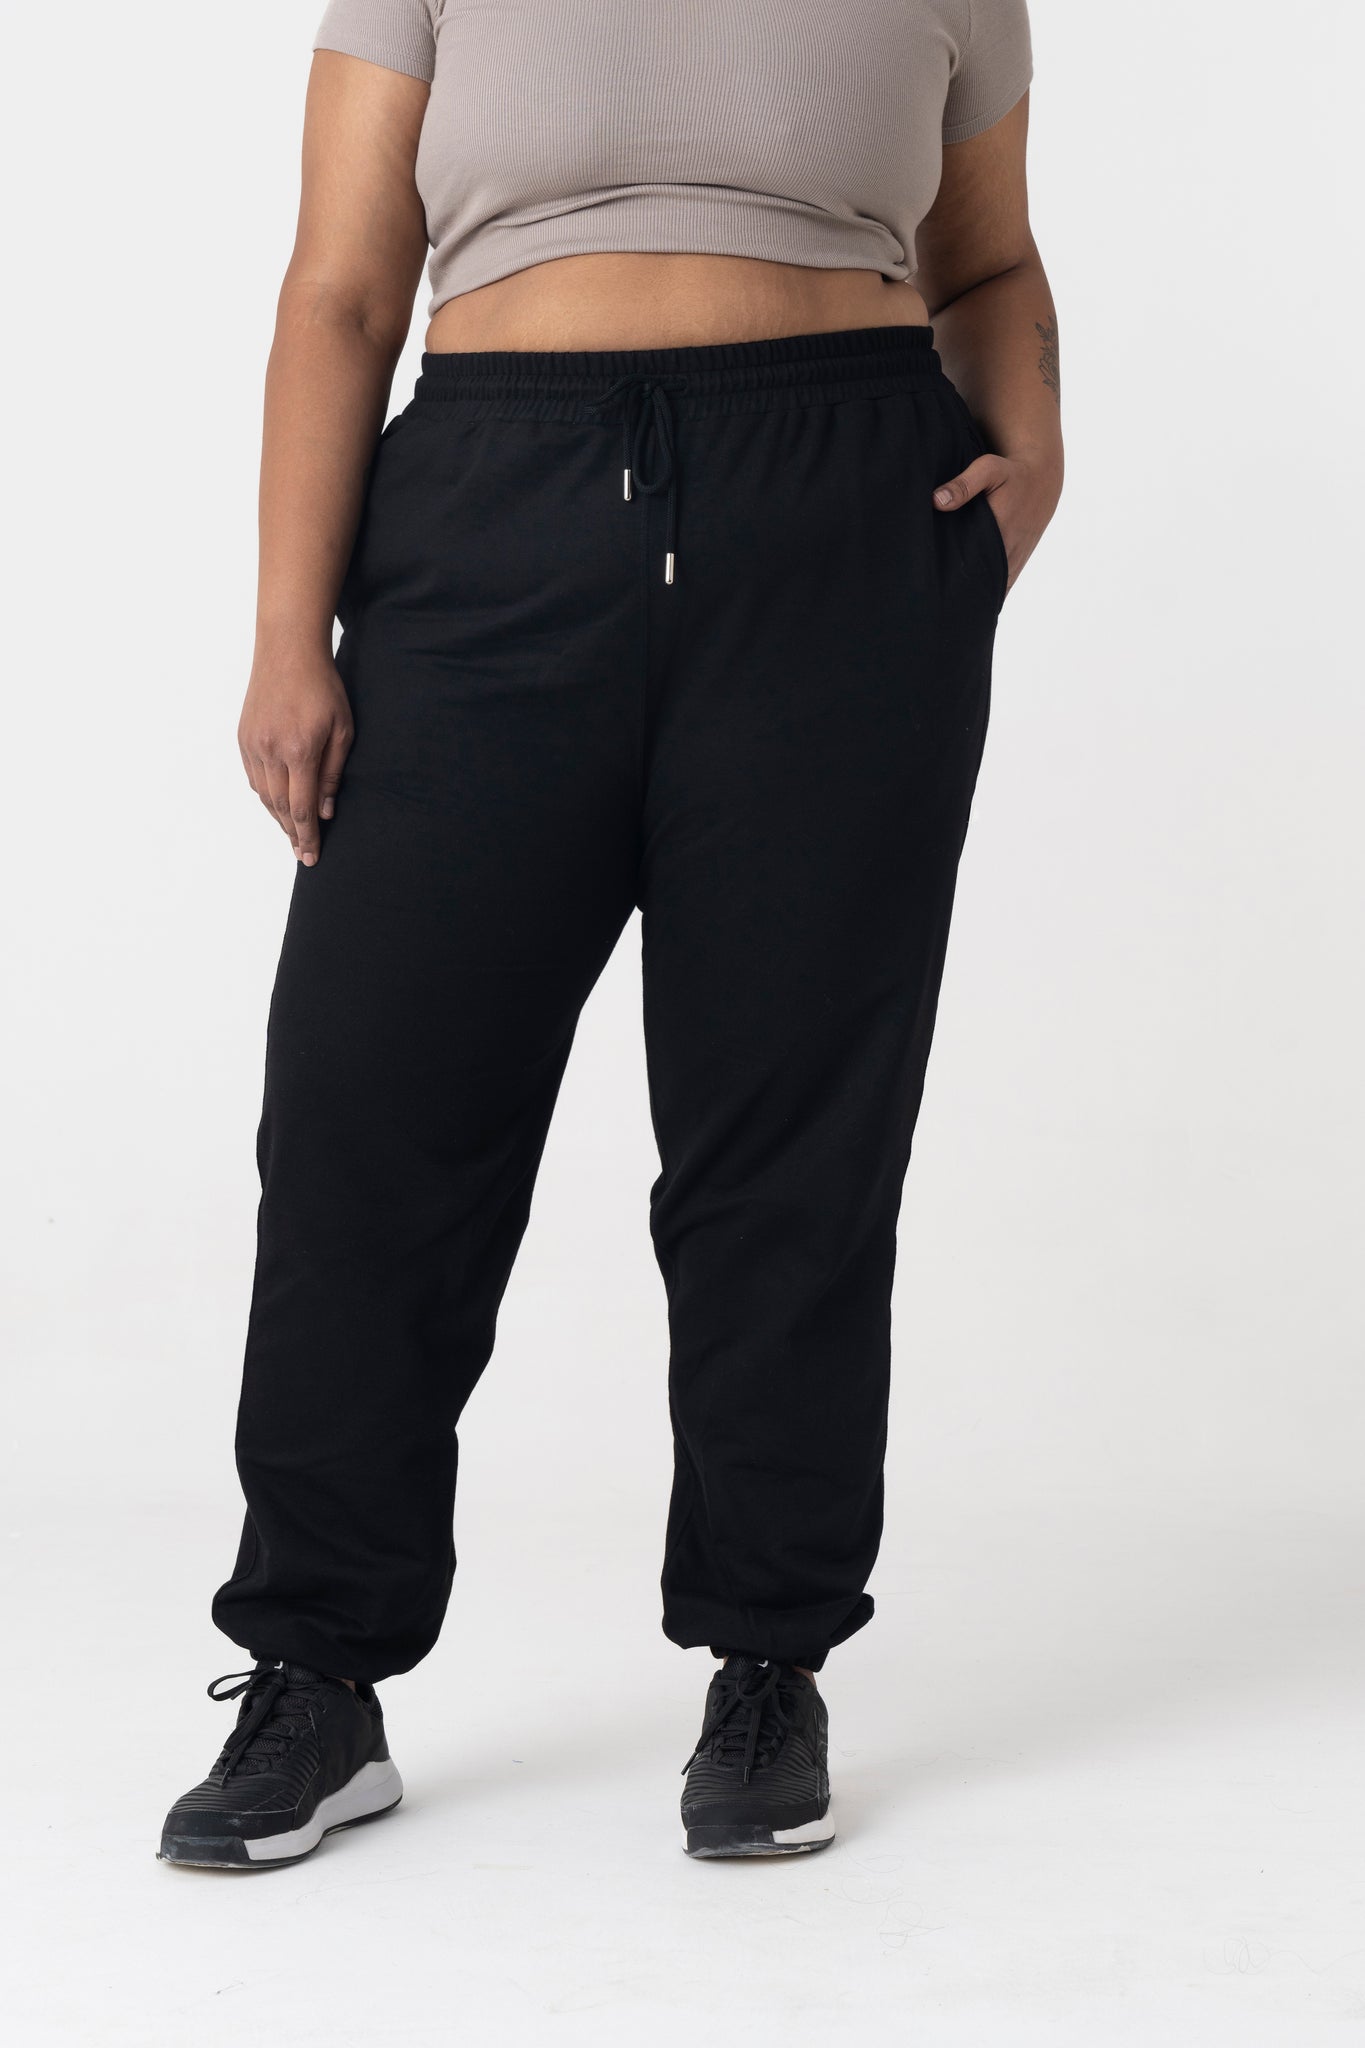 All-Day Jogger: Black